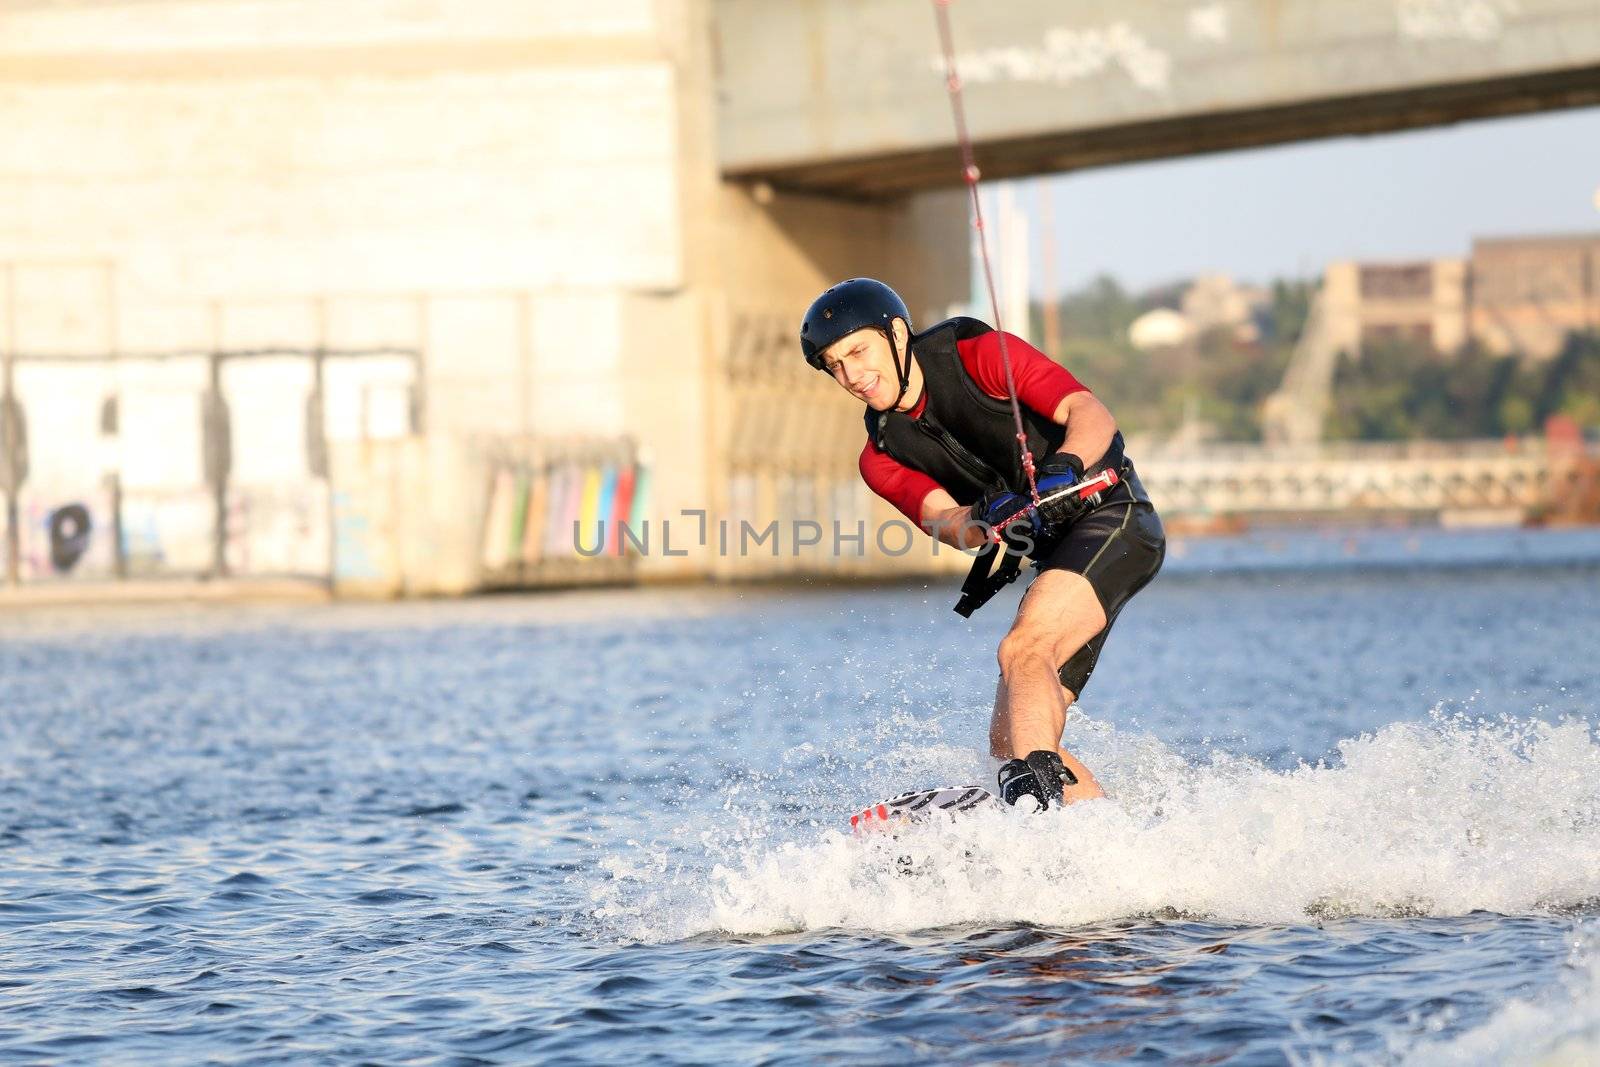 Wakeboarder surfing across a river by Gdolgikh